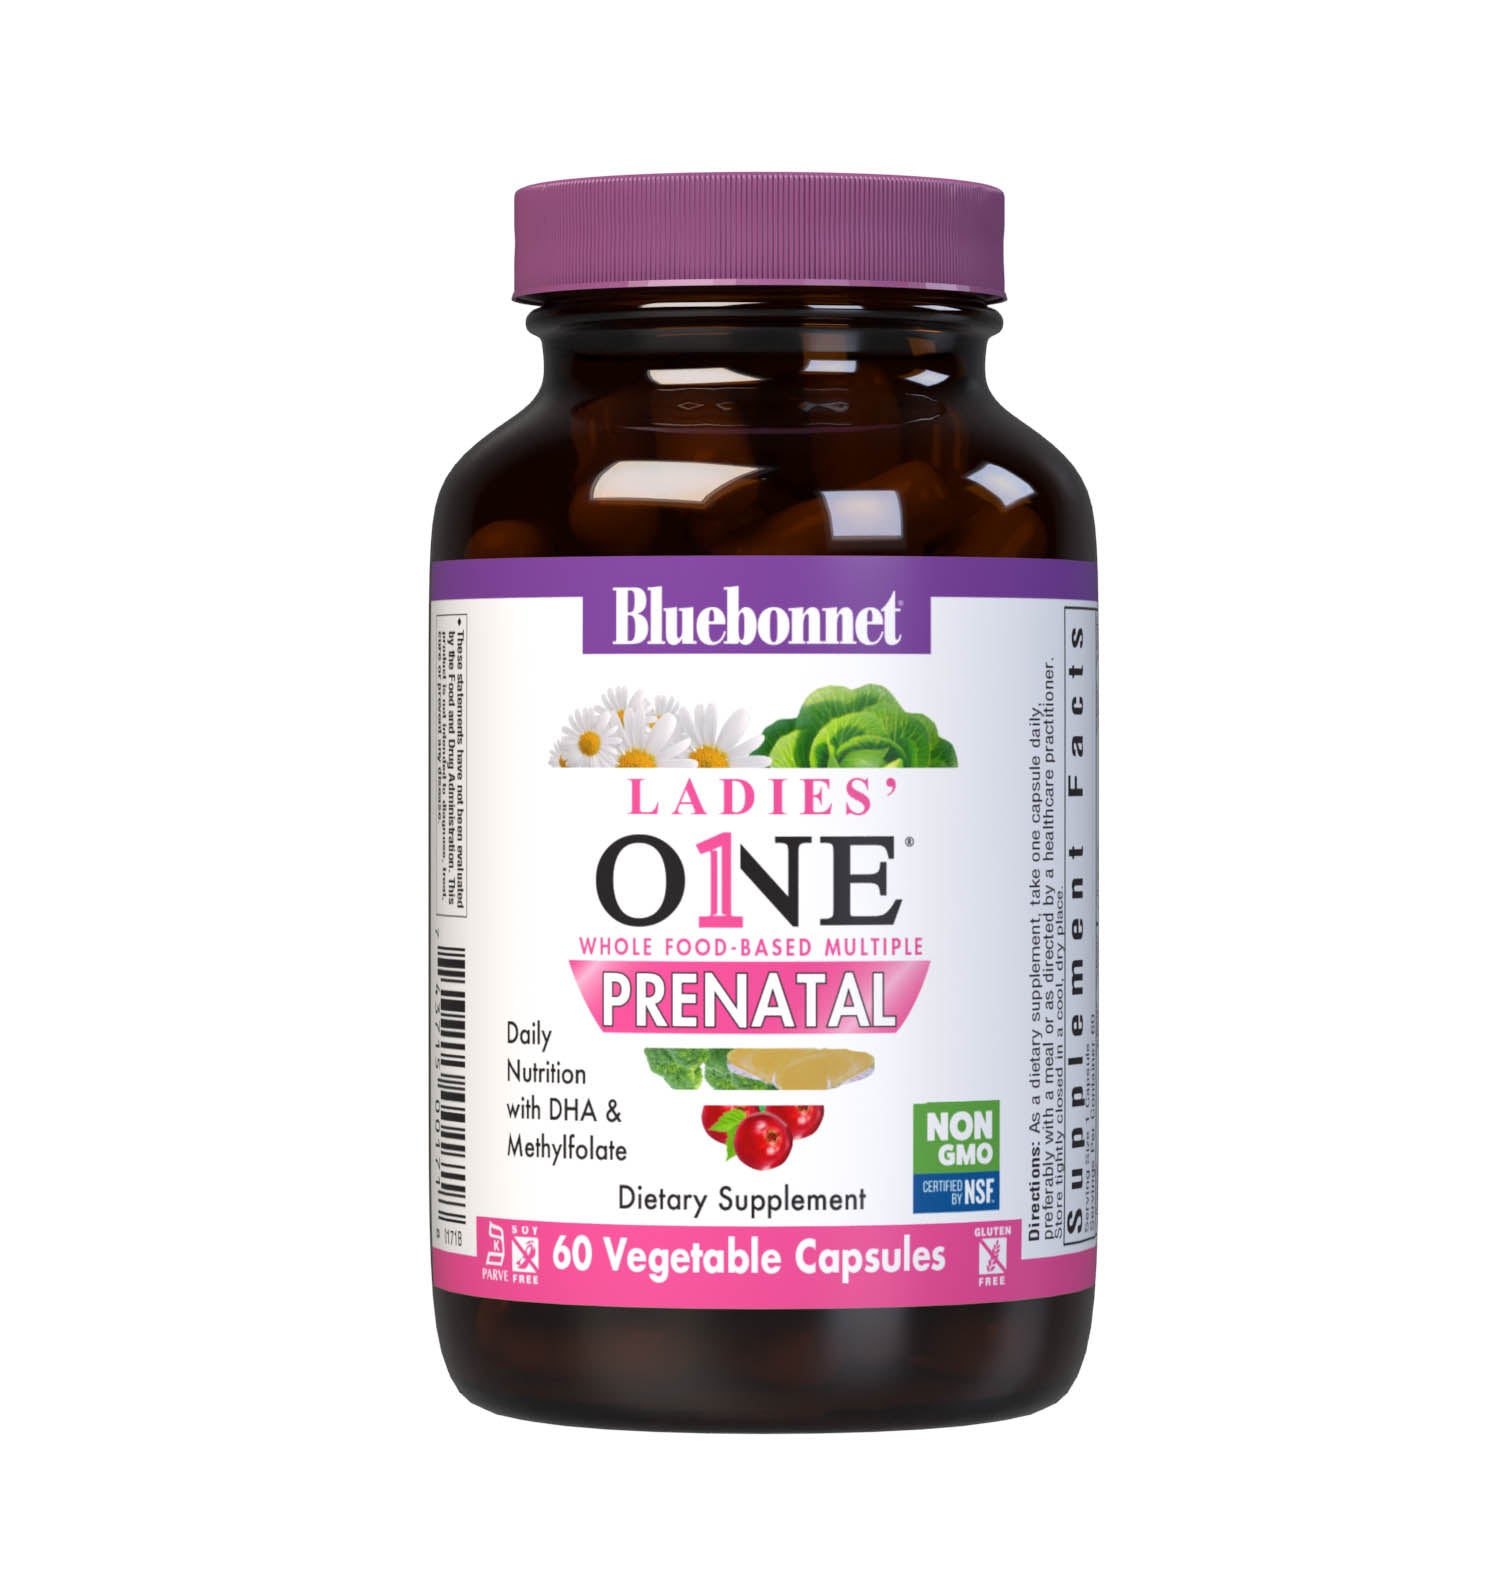 Bluebonnet’s Ladies’ ONE Prenatal Whole Food-Based Multiple 60 vegetable capsules provides daily nutritional support for women trying to conceive, pregnant or nursing in just one convenient capsule per serving. Delivers targeted nutrients for conception and fertility support, healthy pregnancy, proper baby growth and development, and lactation boost. #size_60 count